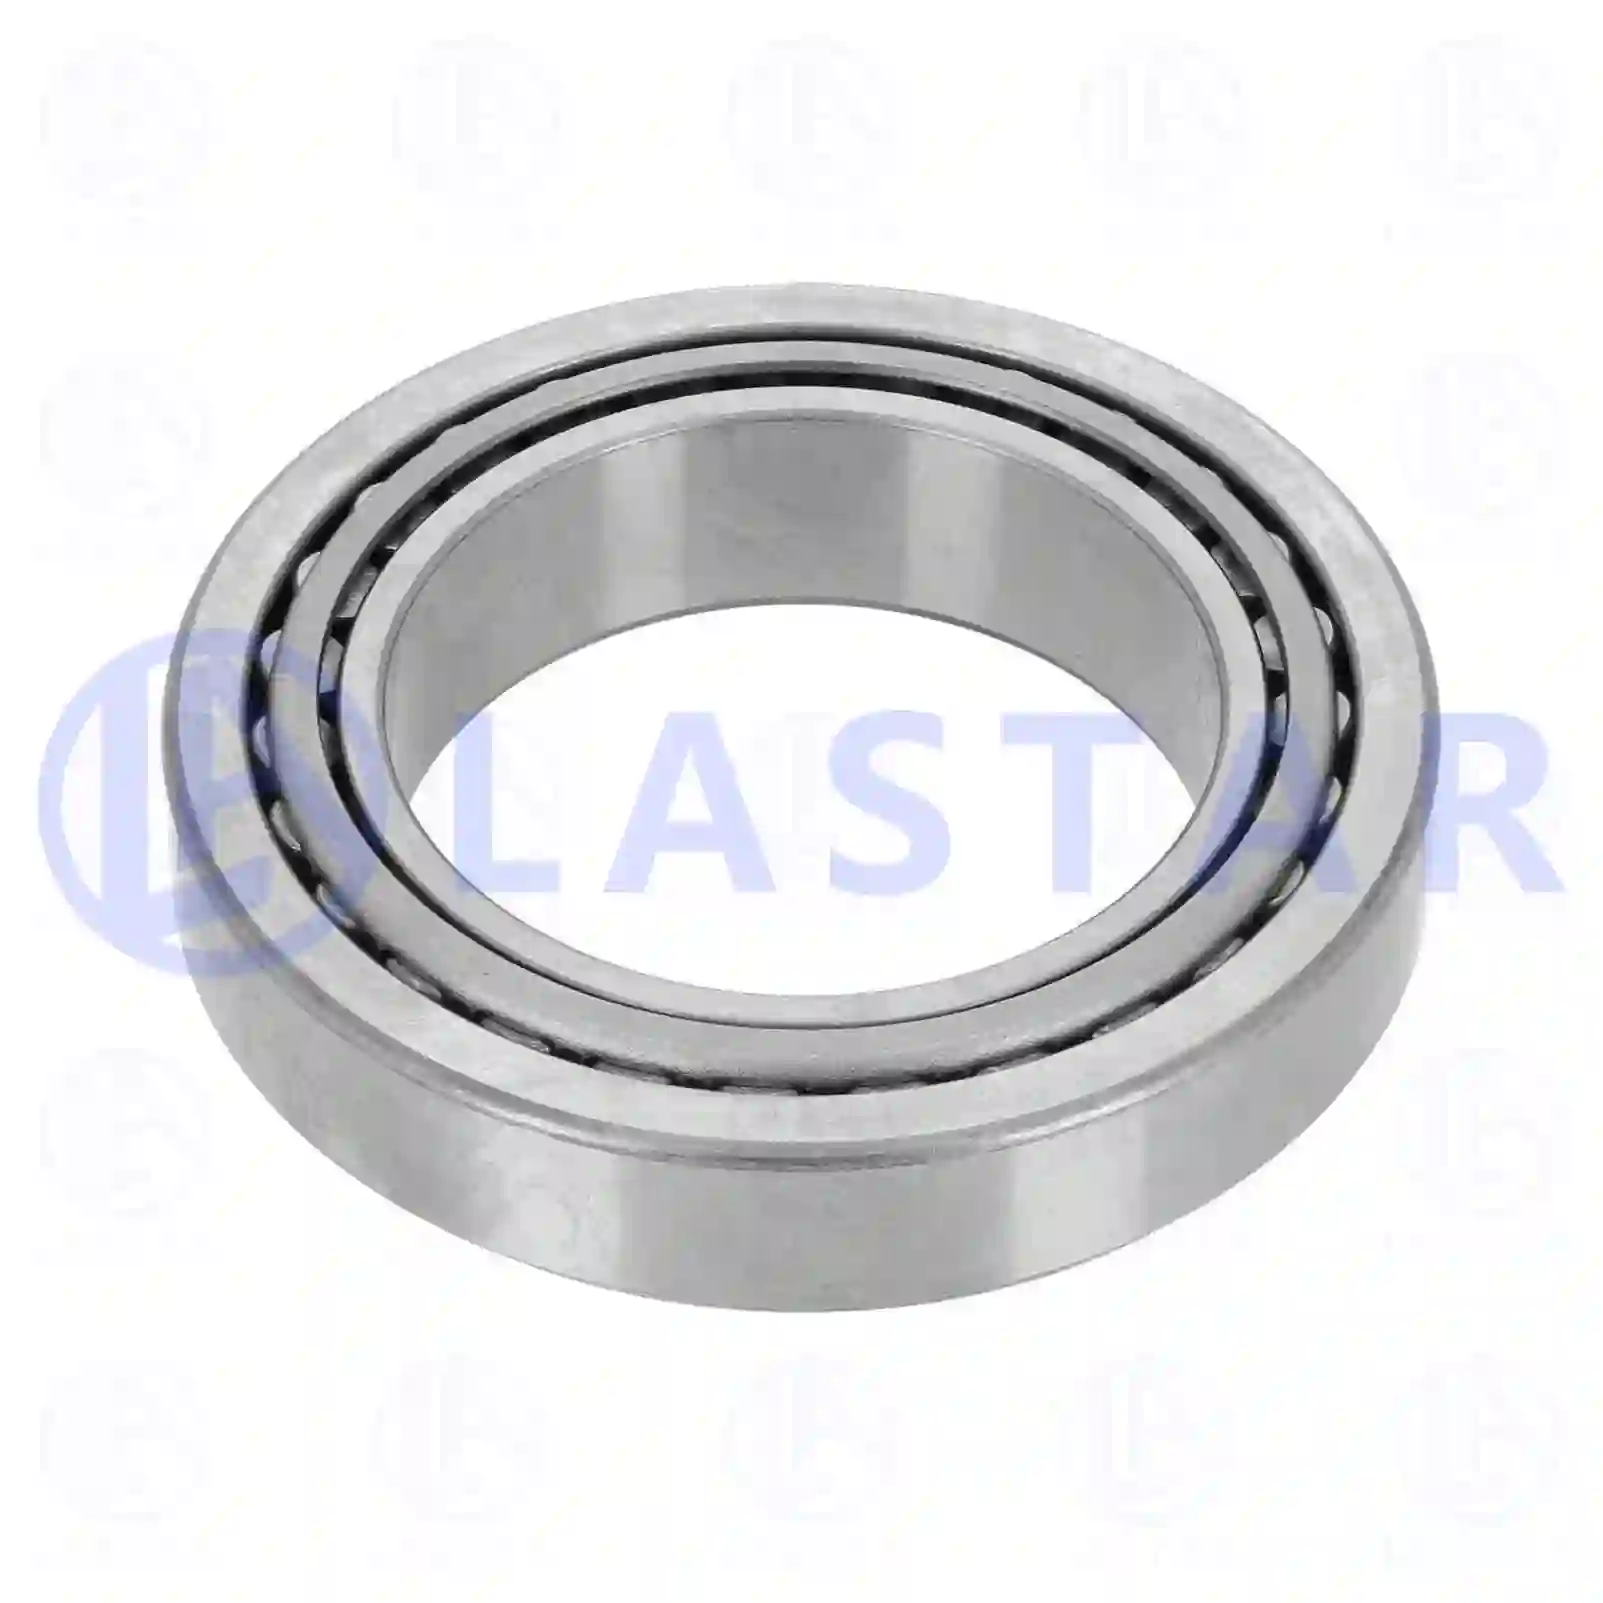 Rear Axle, Complete Tapered roller bearing, la no: 77730390 ,  oem no:0059811505, 005092803, 60115335, 01125572, 5010443903, 60115335, 06324800060, 06324801200, 06324811200, 06324890060, 06324890091, 81934200150, 87523001201, 000720032017, 0059811405, 0059811505, 0059811605, 0159810005, 0159810805, 0179818205, 0023336246, 5010443903, 7400184623, 1524964, 184623, 2V5501283, ZG02982-0008 Lastar Spare Part | Truck Spare Parts, Auotomotive Spare Parts